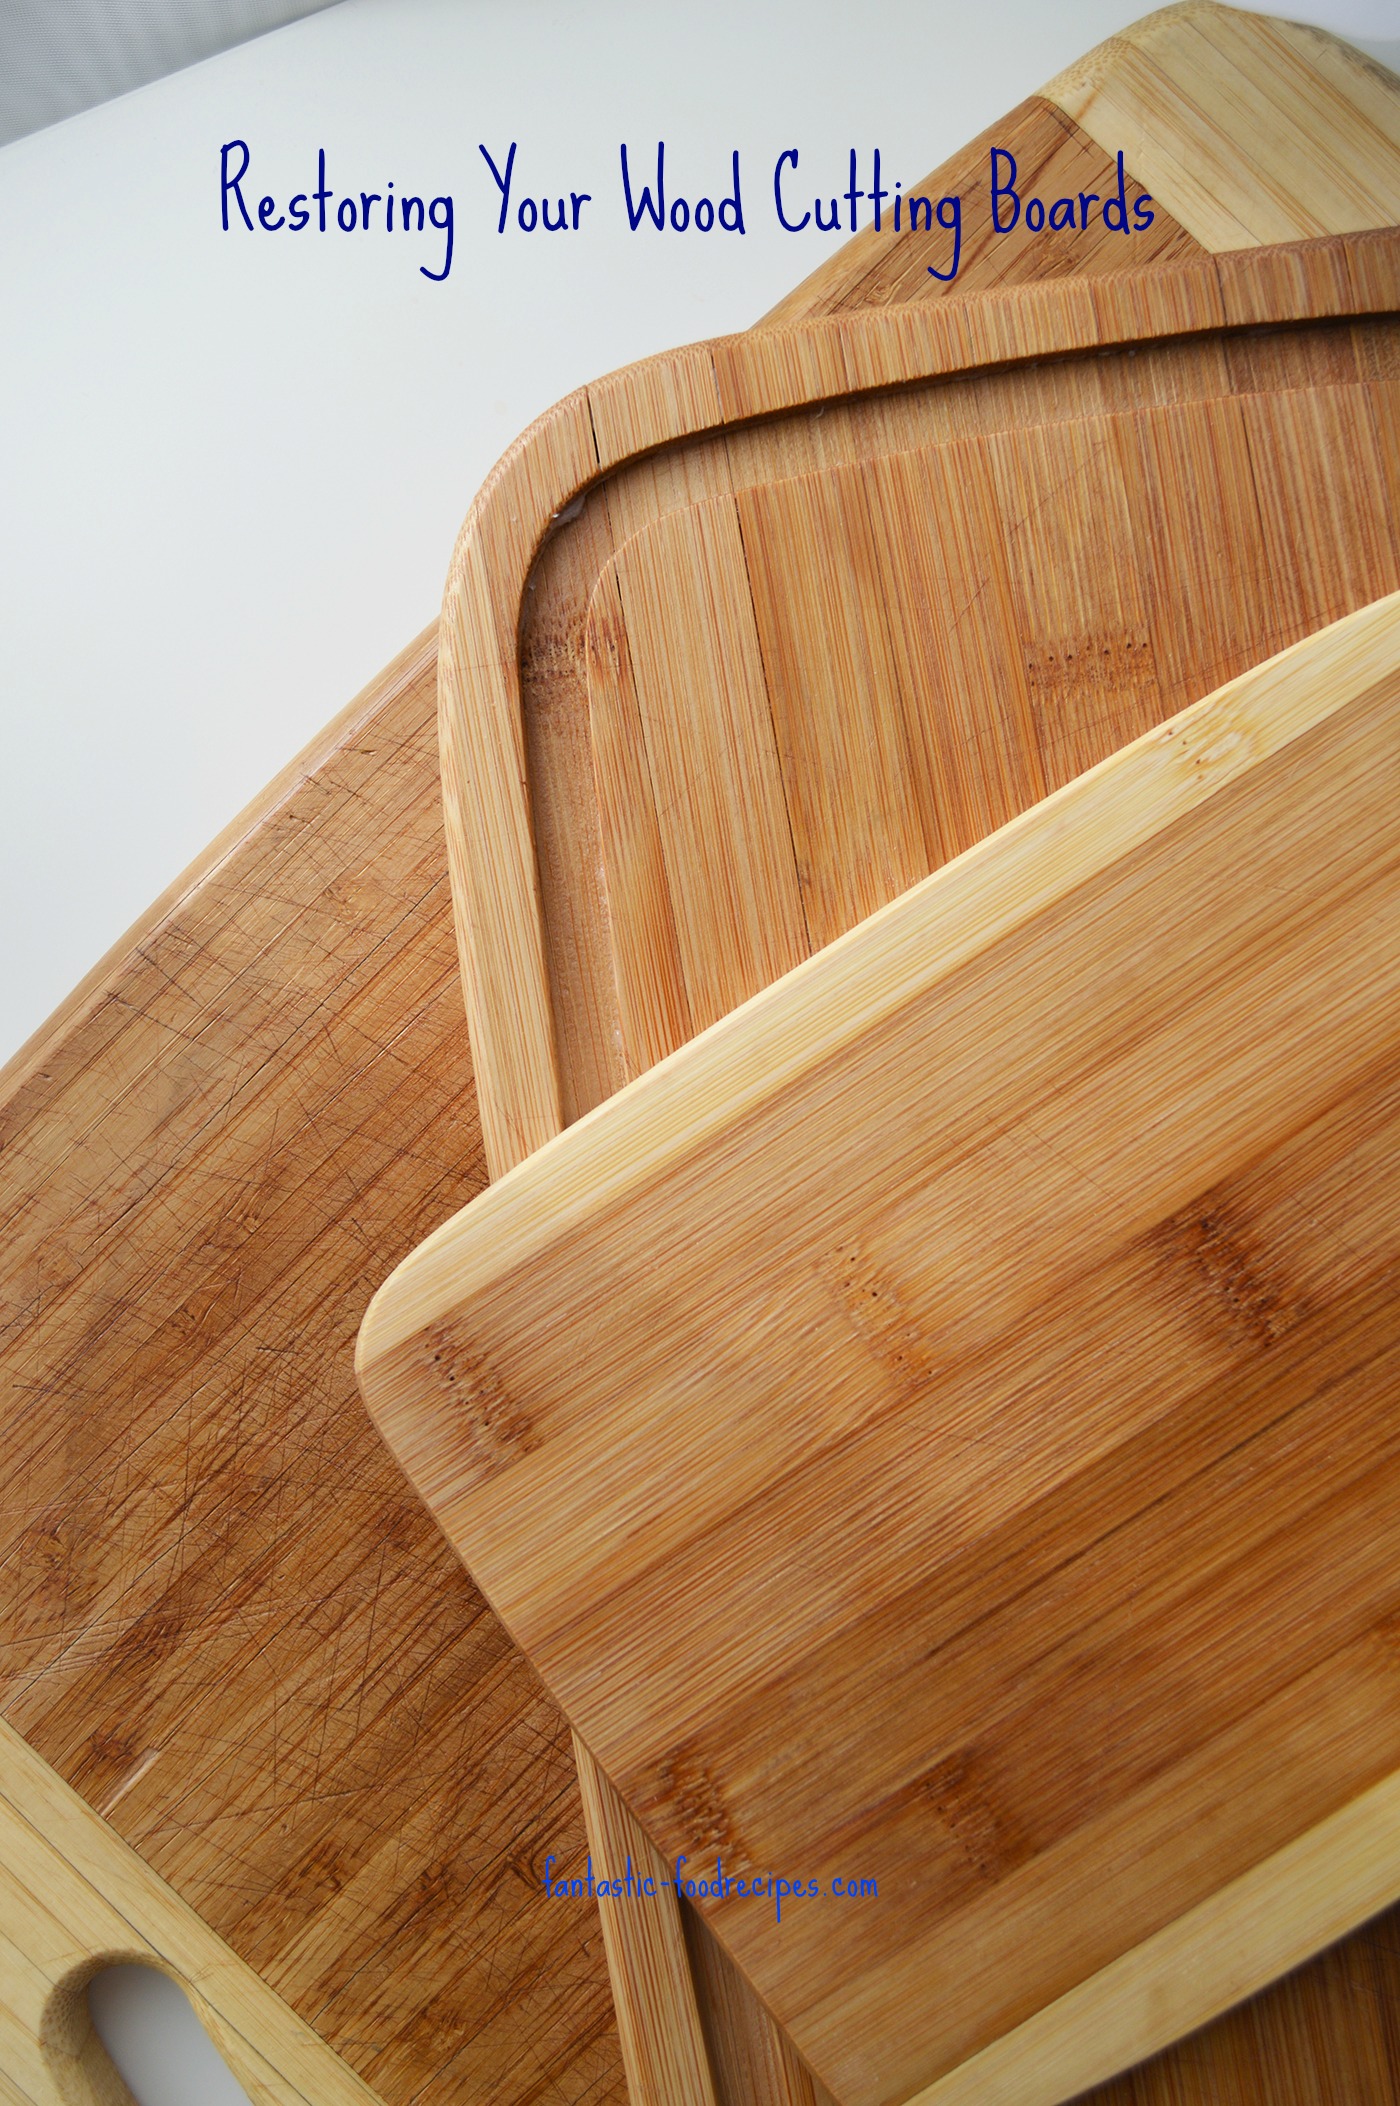 Restoring Your Wood Cutting Boards